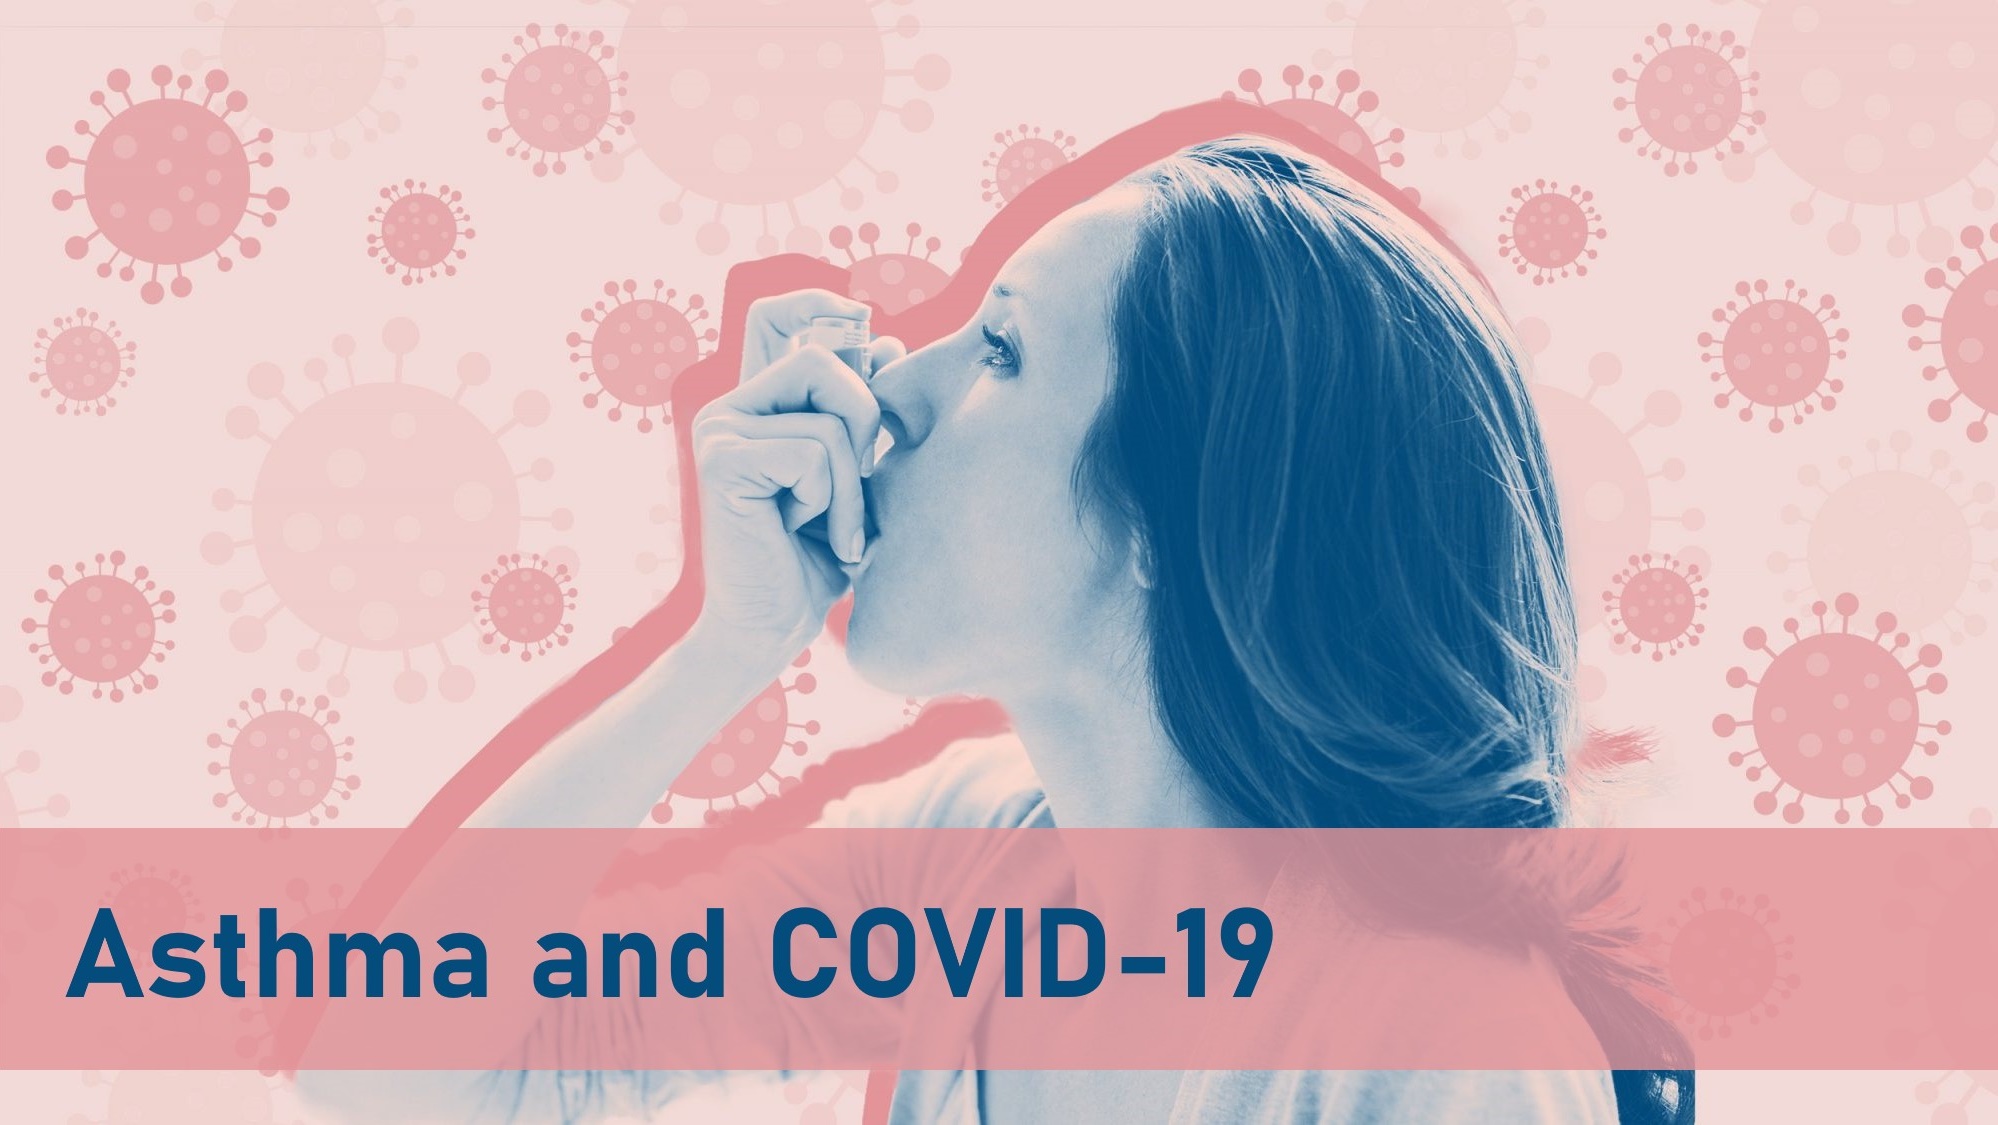 Asthma and COVID-19: What Should Asthma Patient Be Doing?